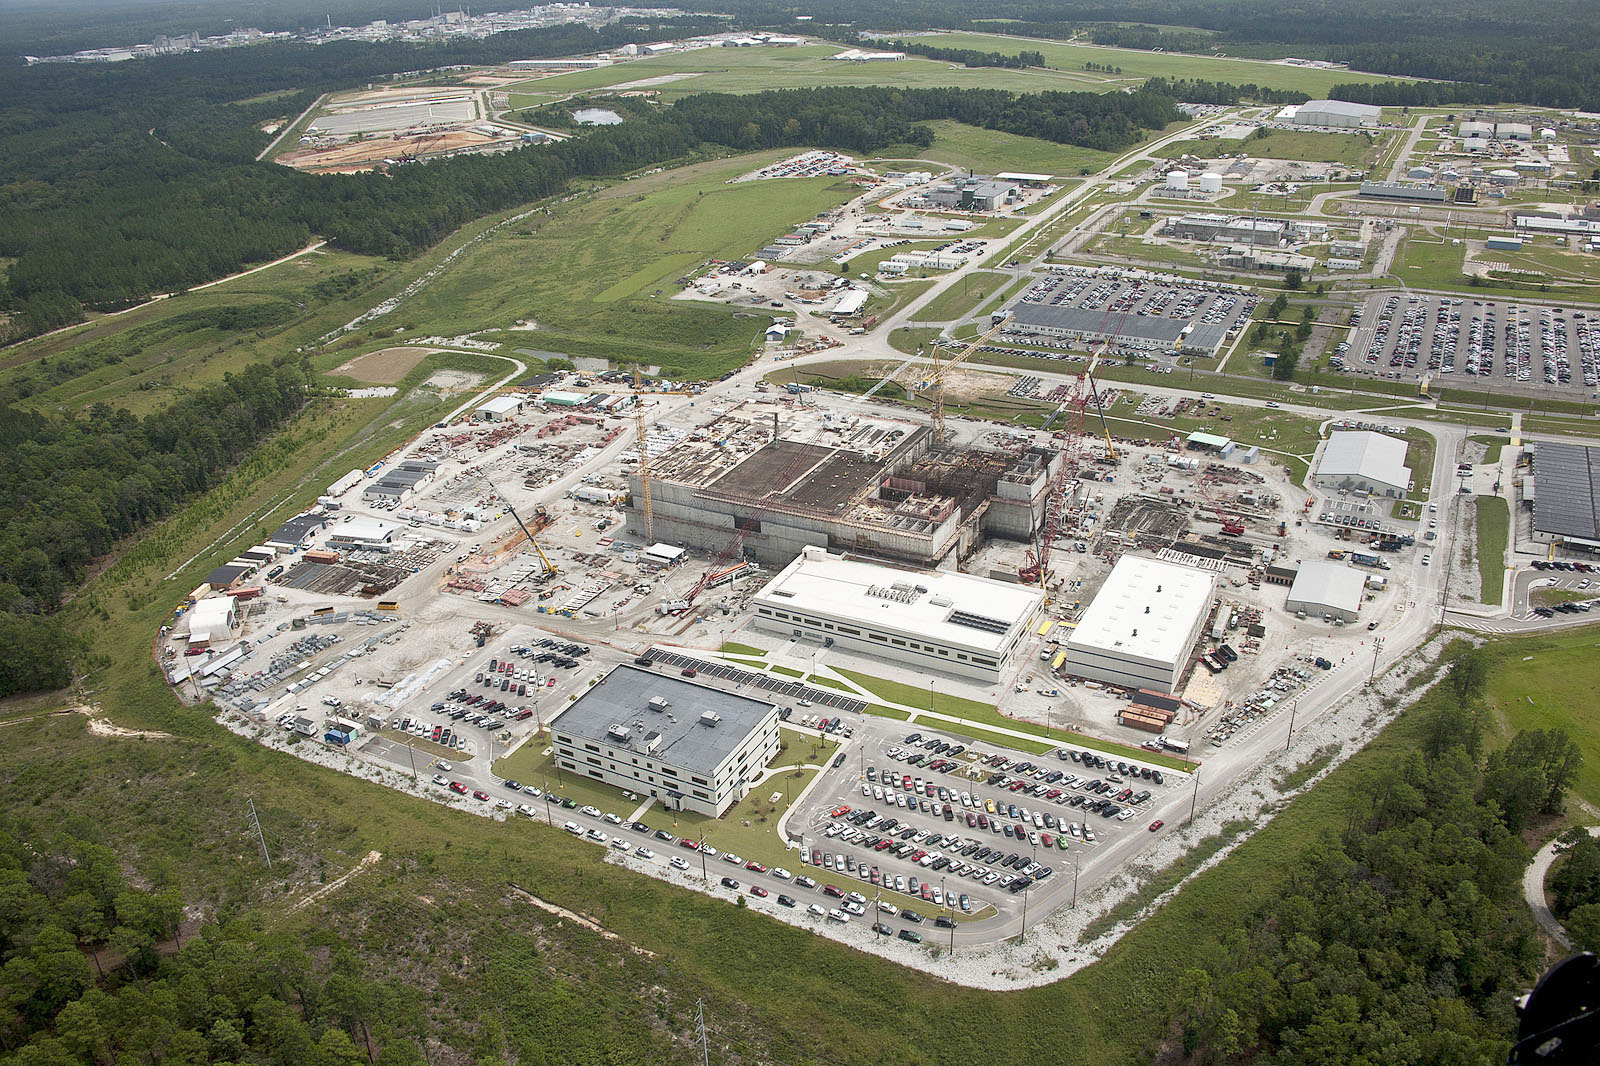 A large stash of plutonium held by Japan for decades could be shipped back to the Savannah River Site in South Carolina as early as this month. | SAVANNAH RIVER SITE/KYODO